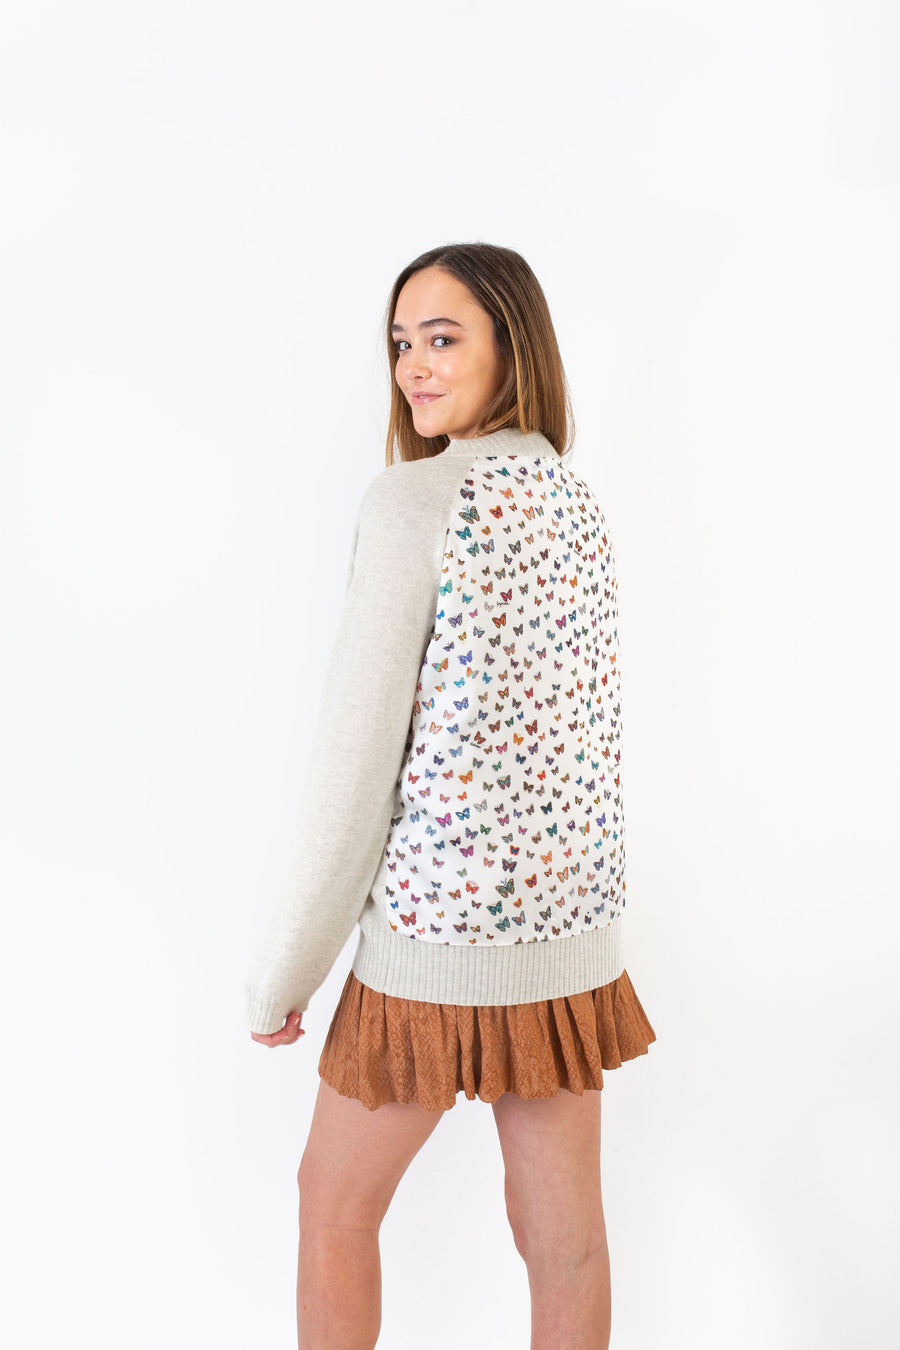 WHITMAN SWEATER GREY W/ RAINBOW BUTTERFLY *LIMITED*EDITION*